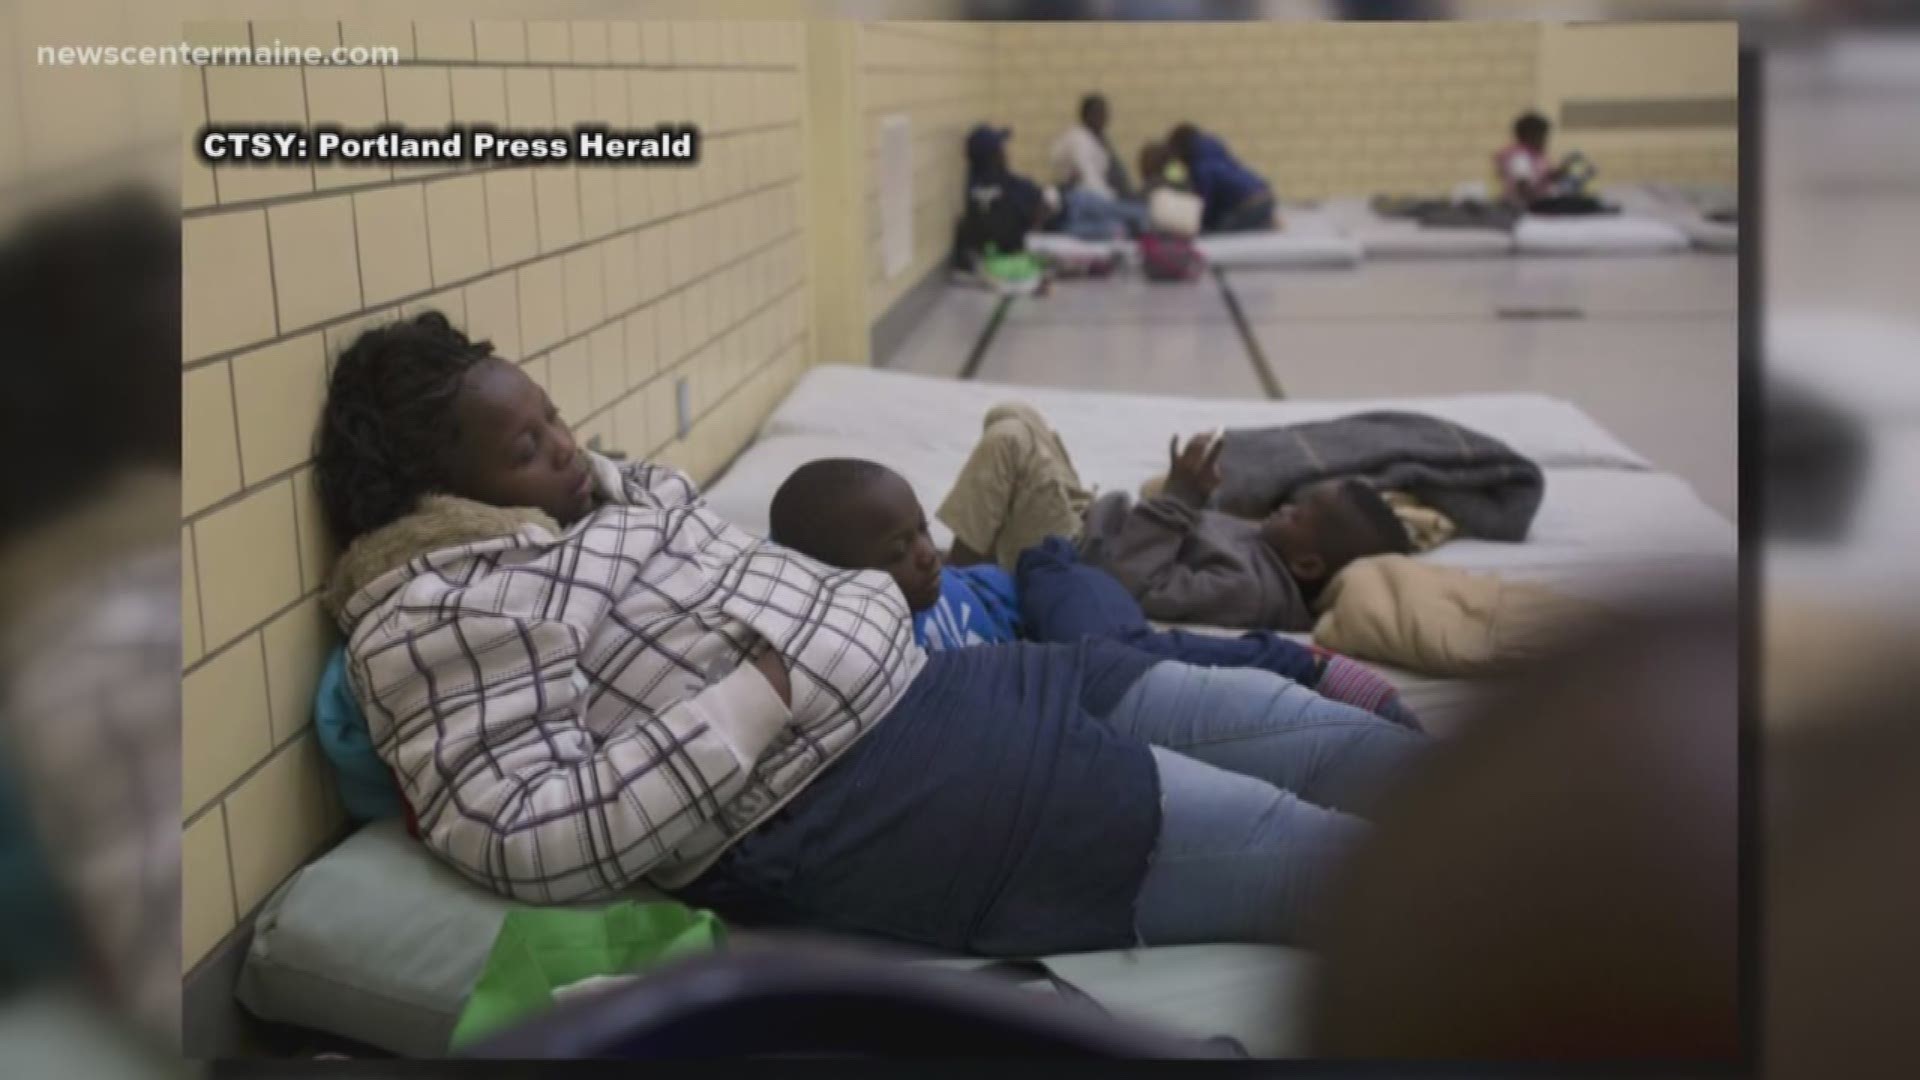 A large number of asylum seekers in Portland has led to shelter overcrowding.